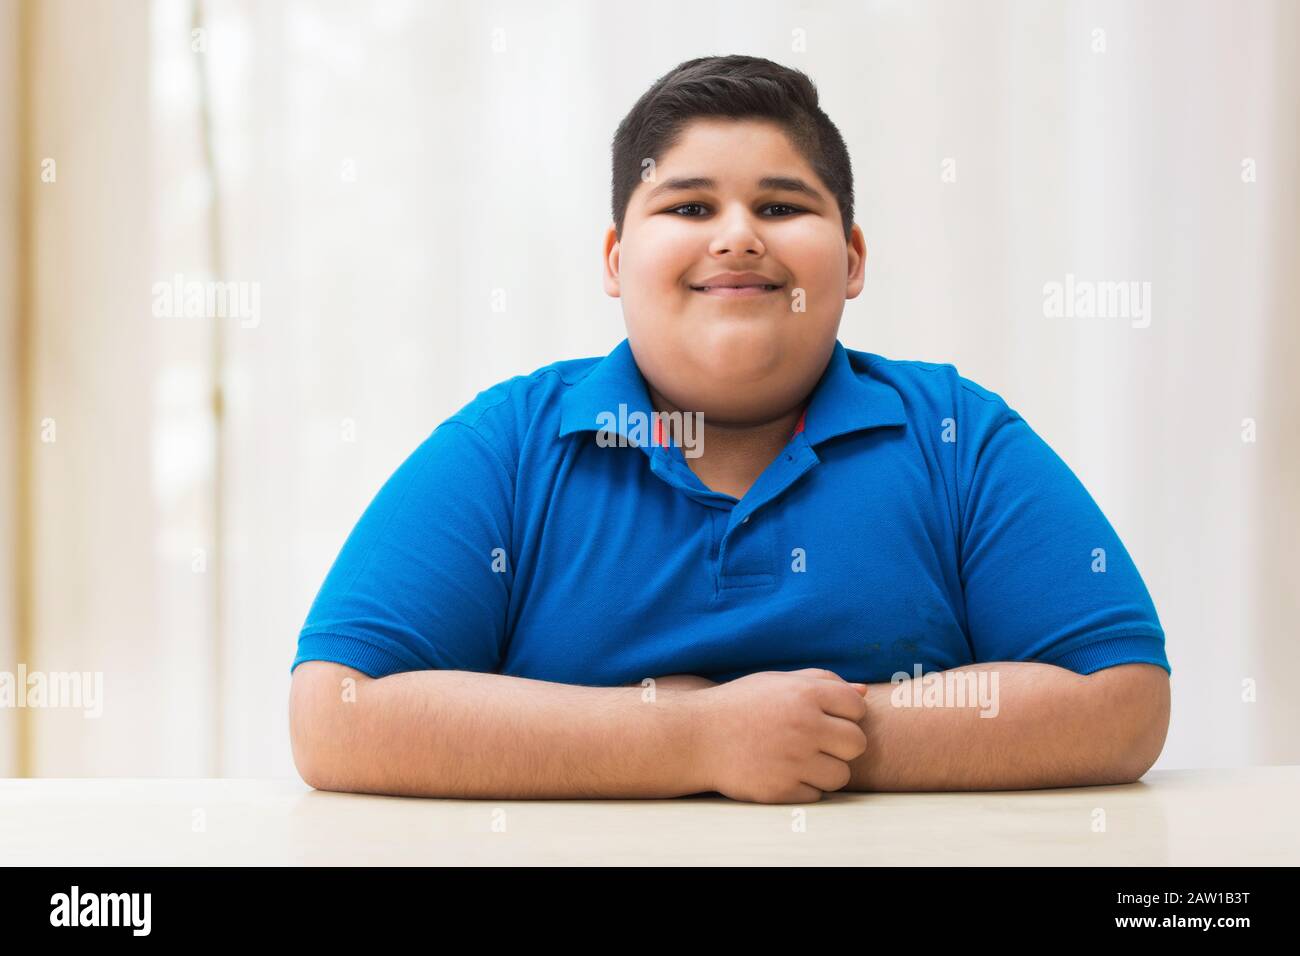 2422 Young Chubby Boy Stock Photos & High-res Pictures